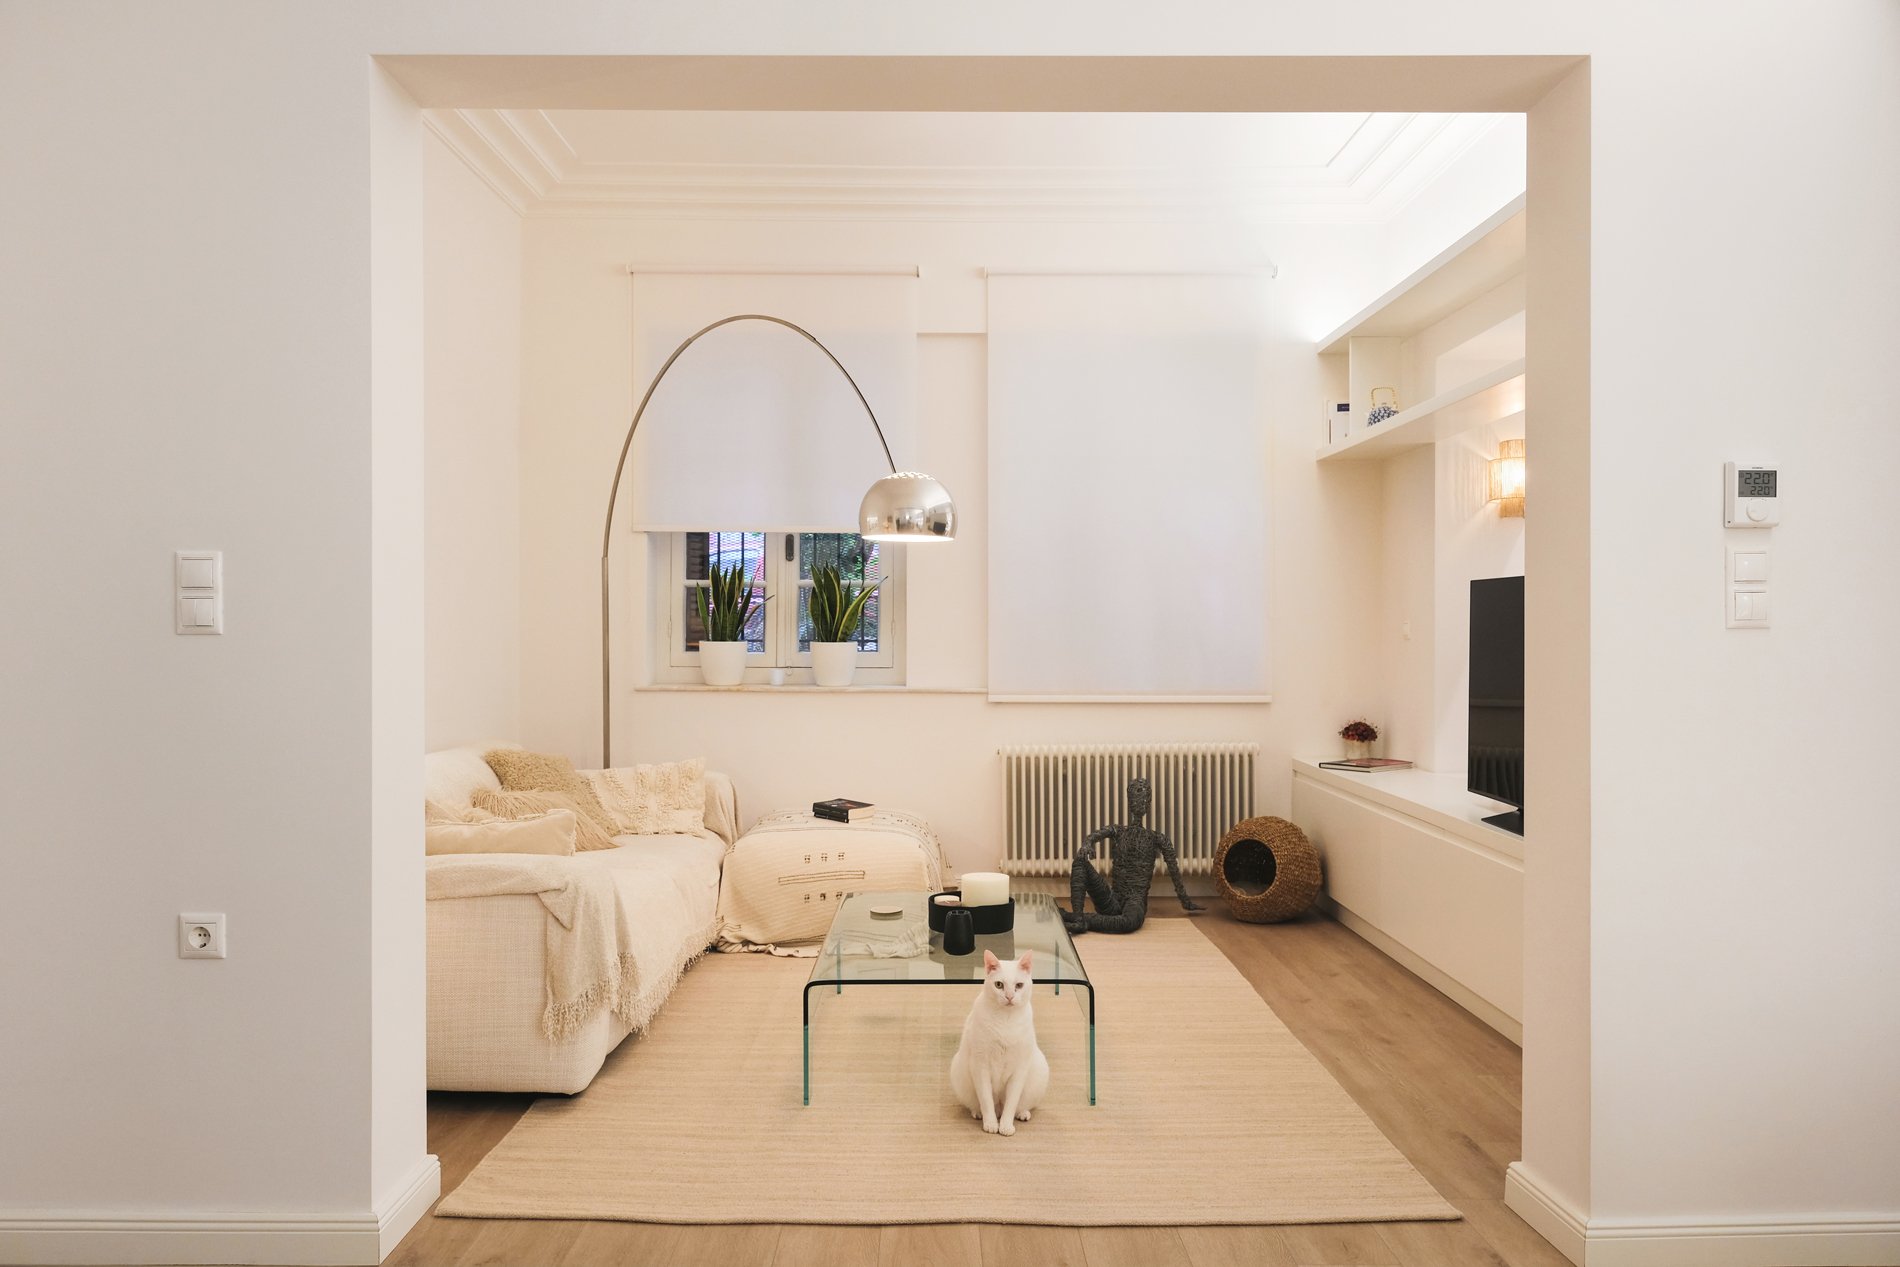  Renovation of 1930’s ground-floor apartment in Athens, Penny Battalia architect 